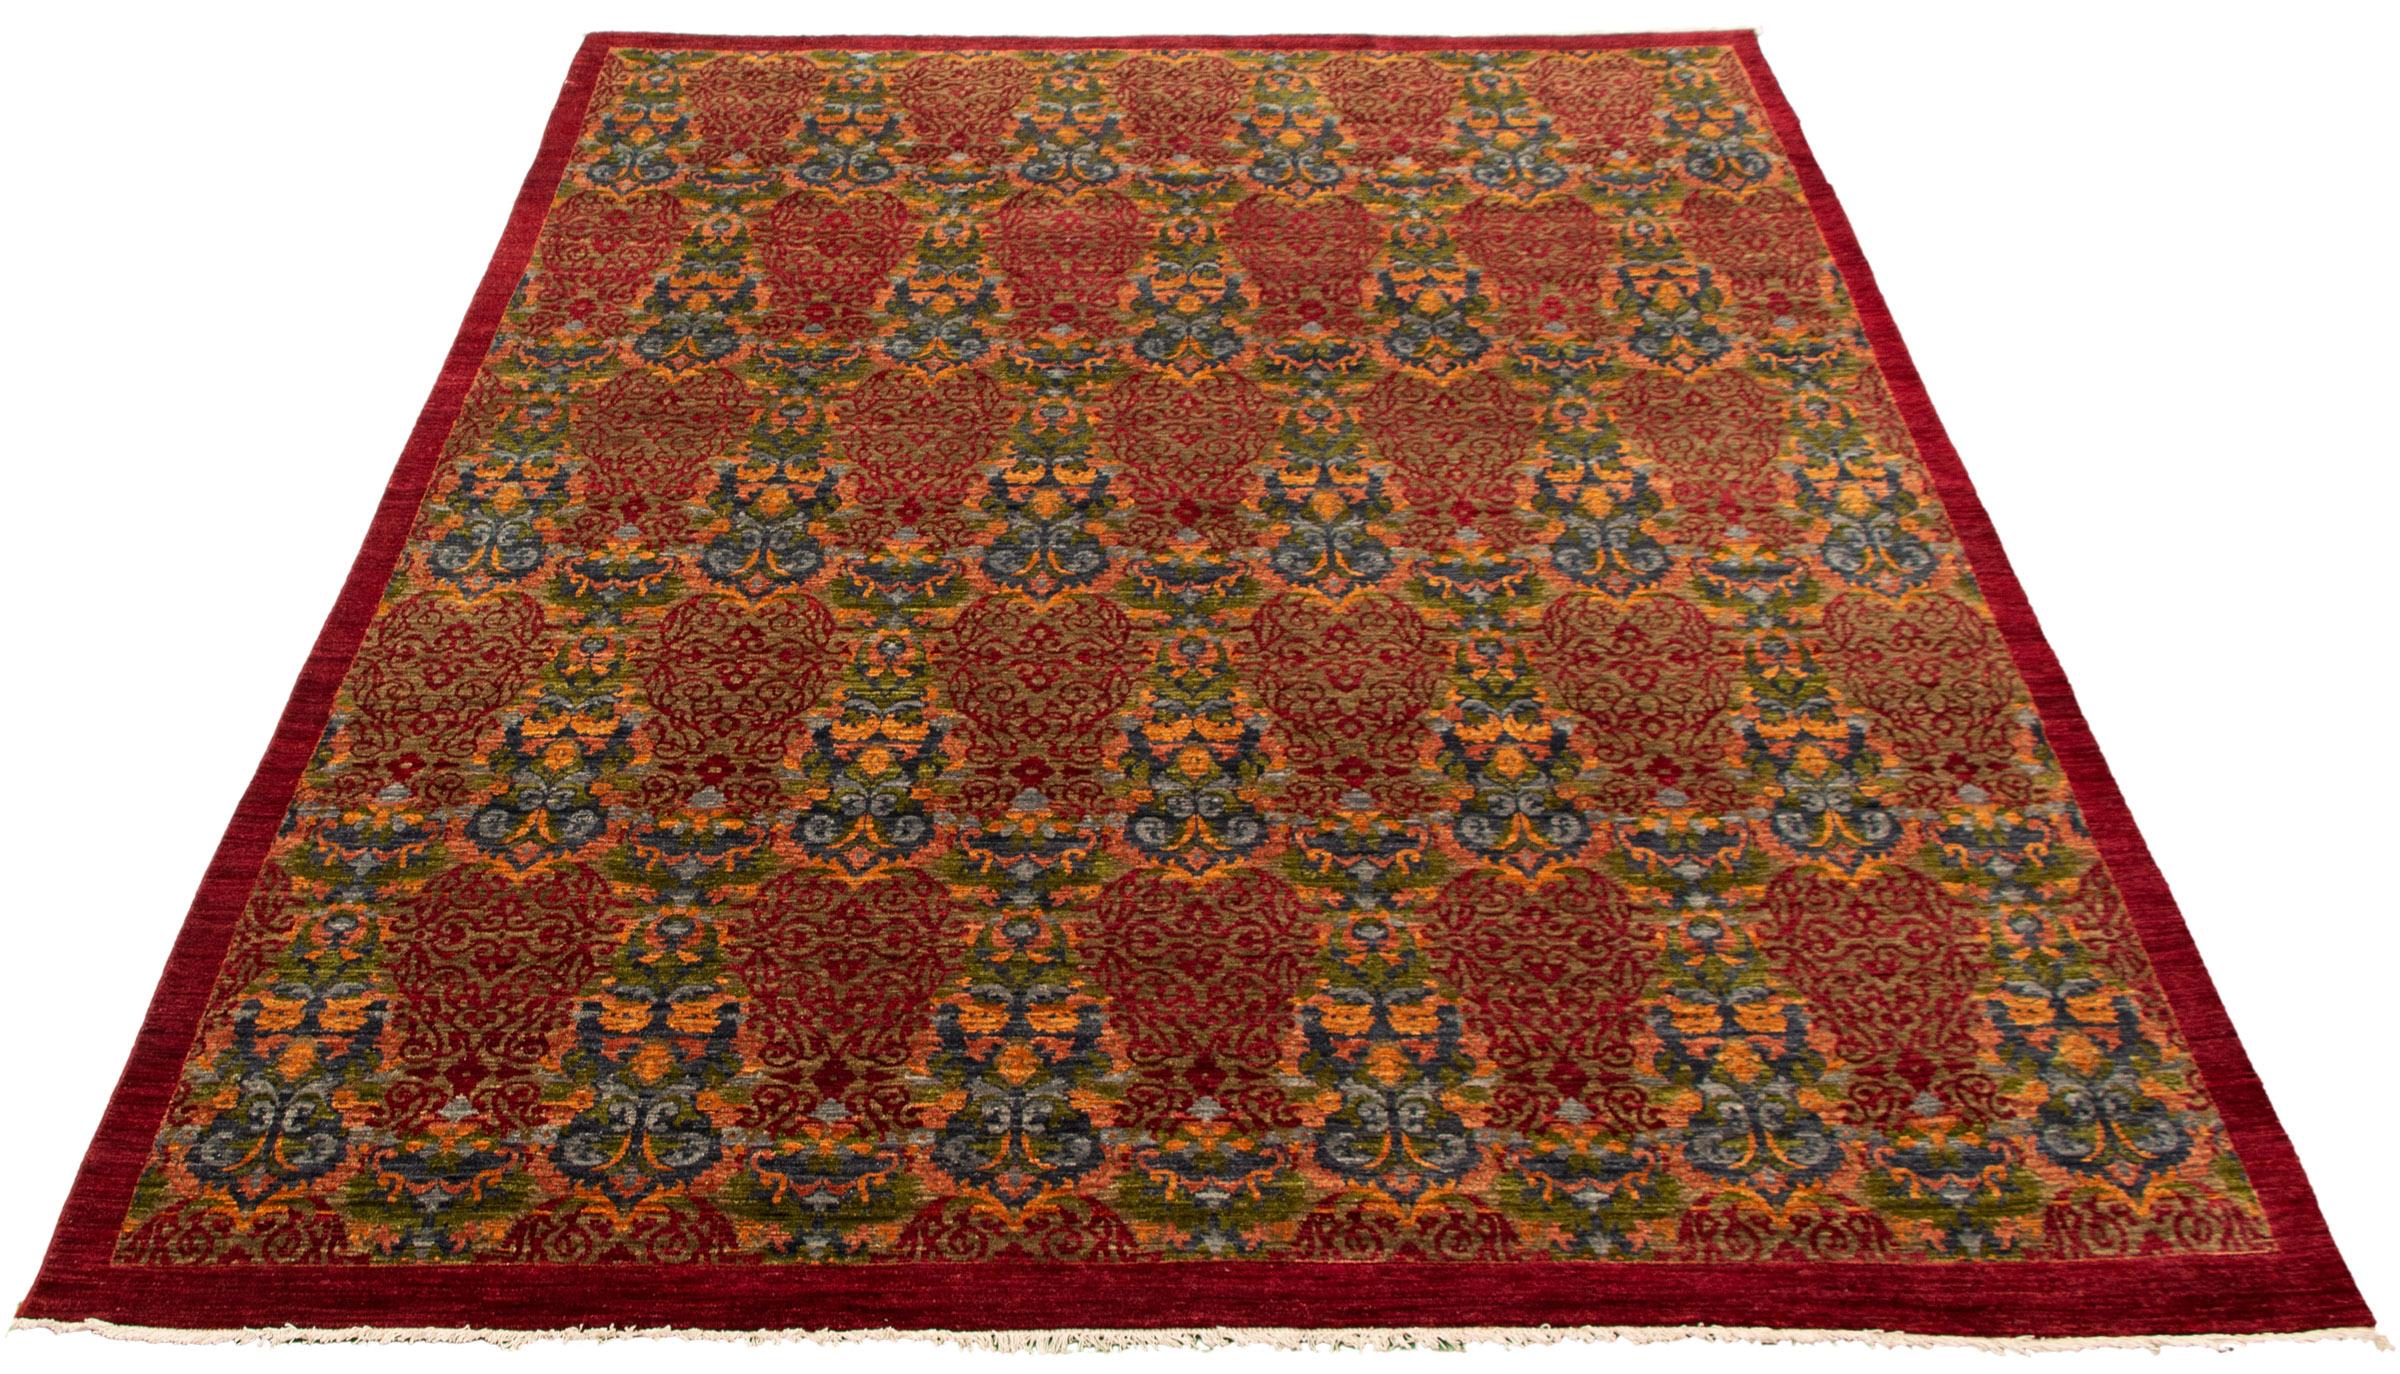 Modern Lahore Carpet, Transitional, Red, Taupe, Blue, and Green, Wool, 8’ x 10’ For Sale